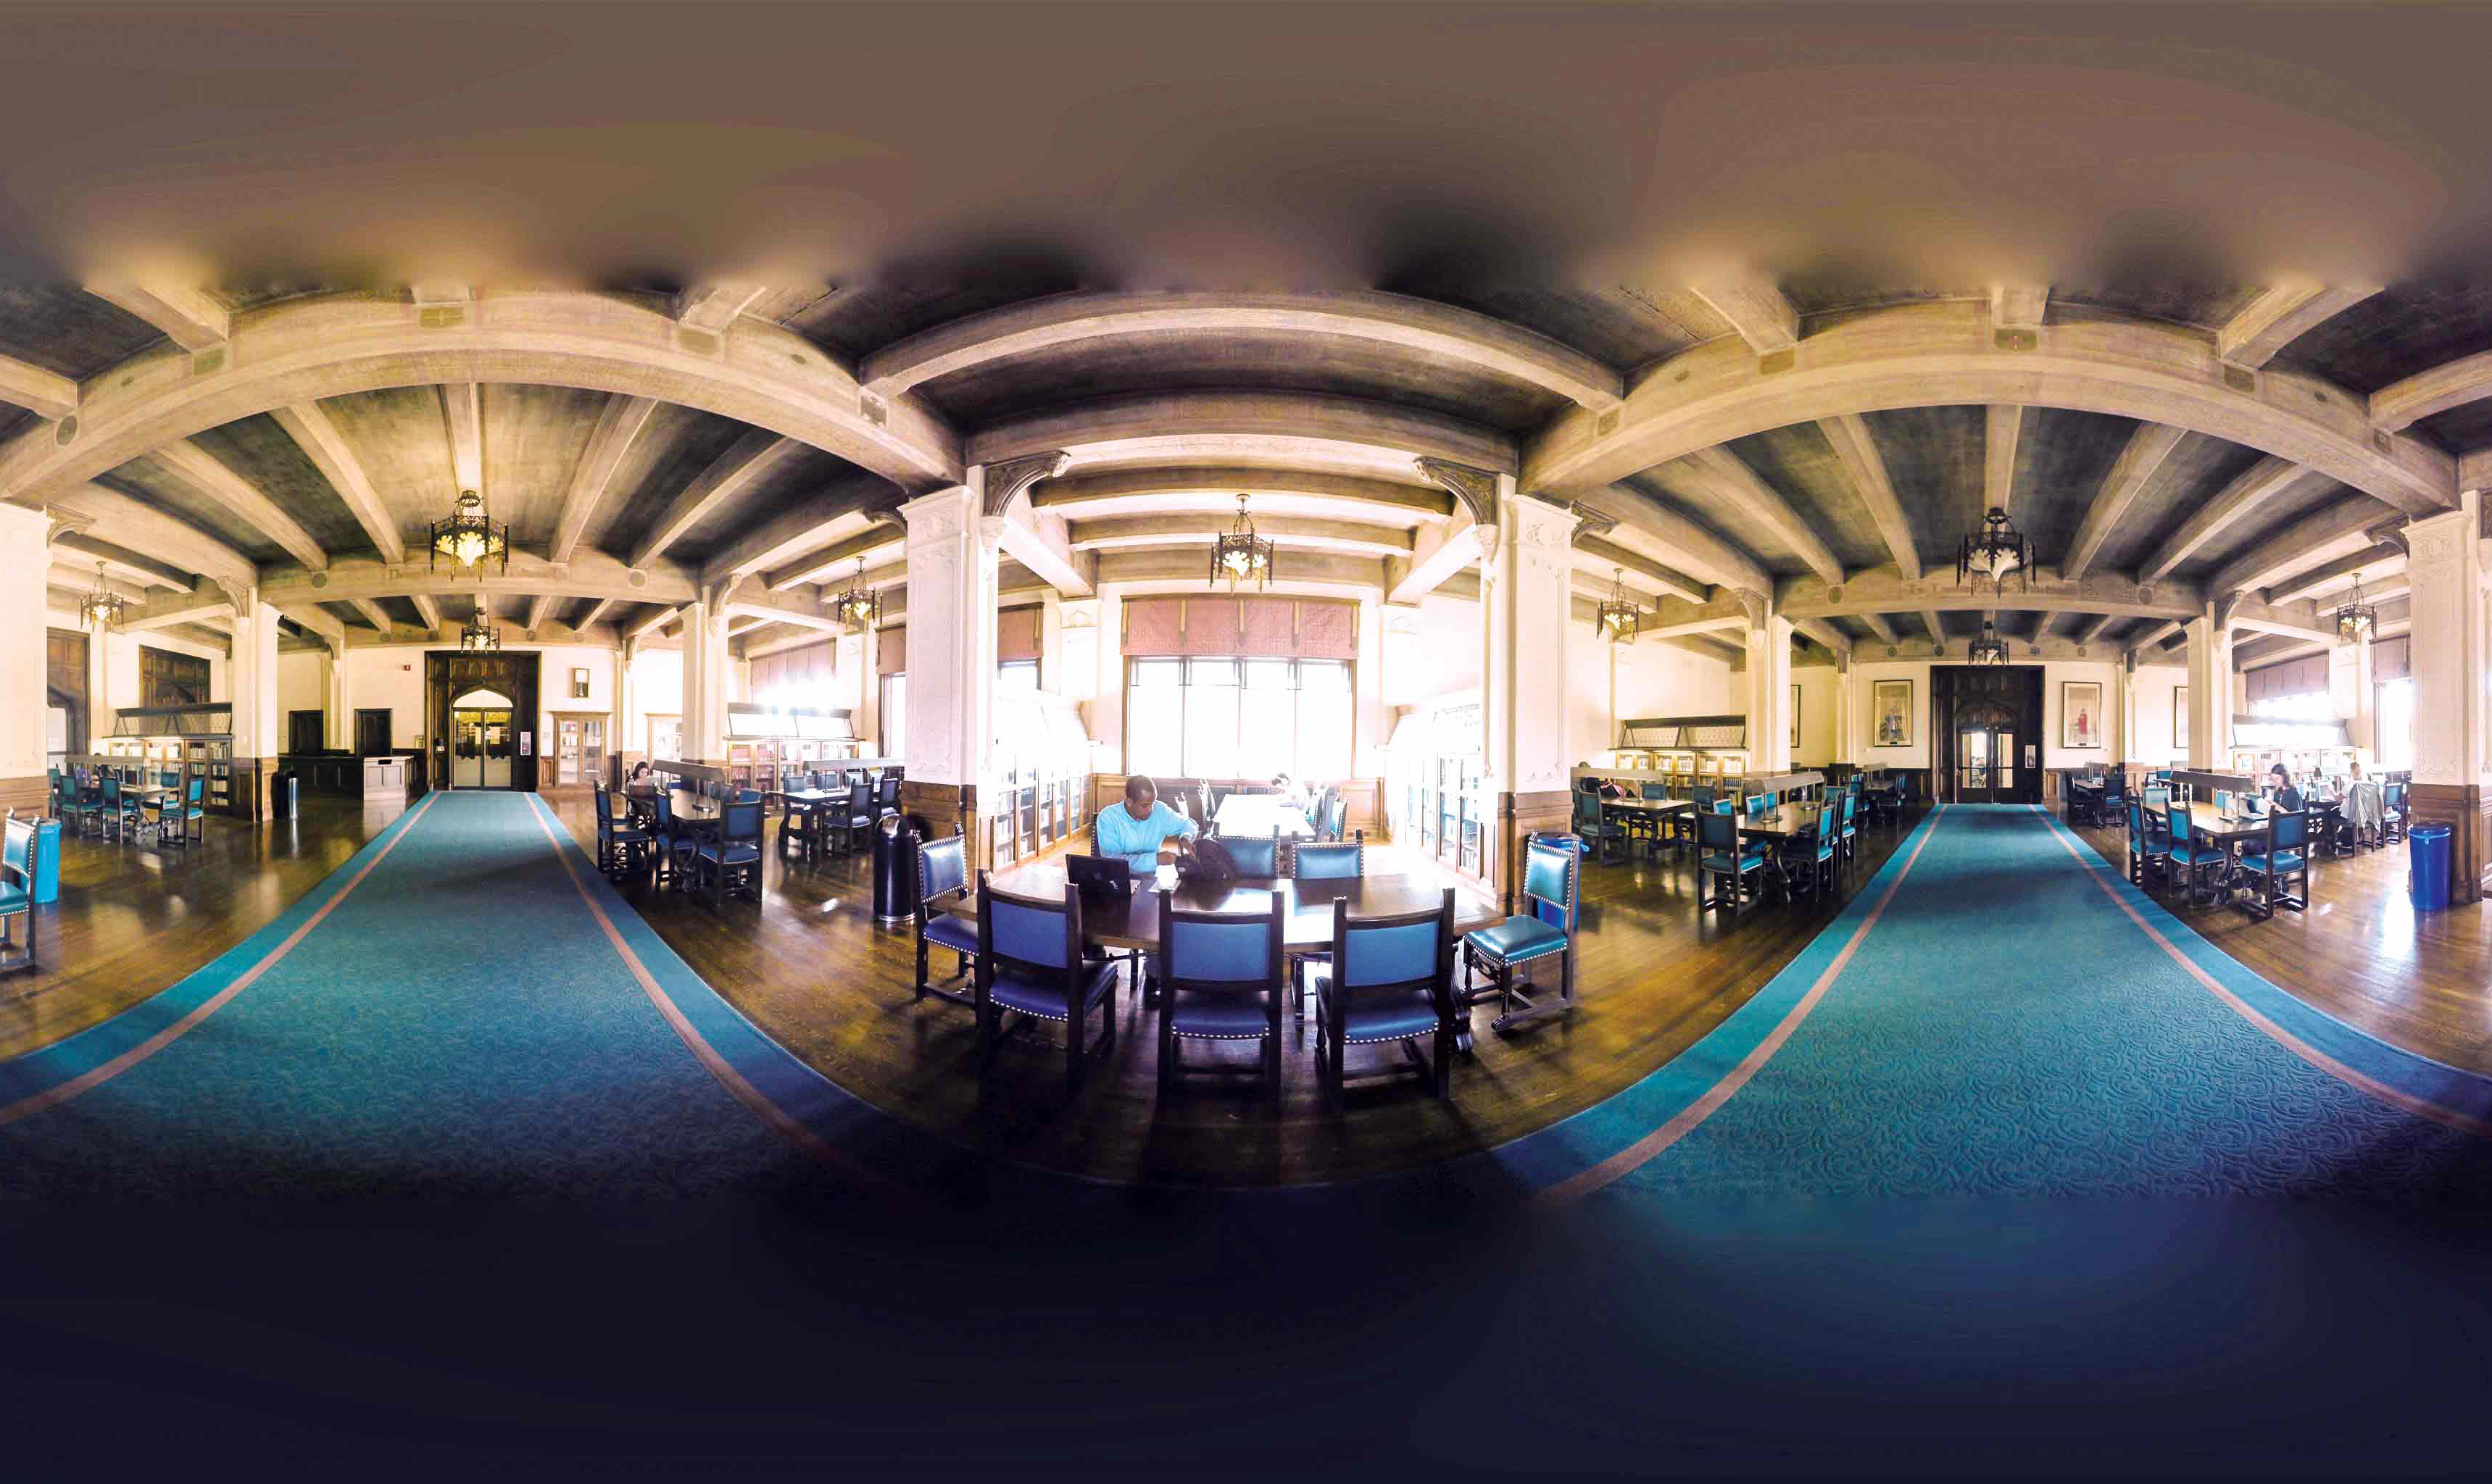 Google 360 view of the USF reading room